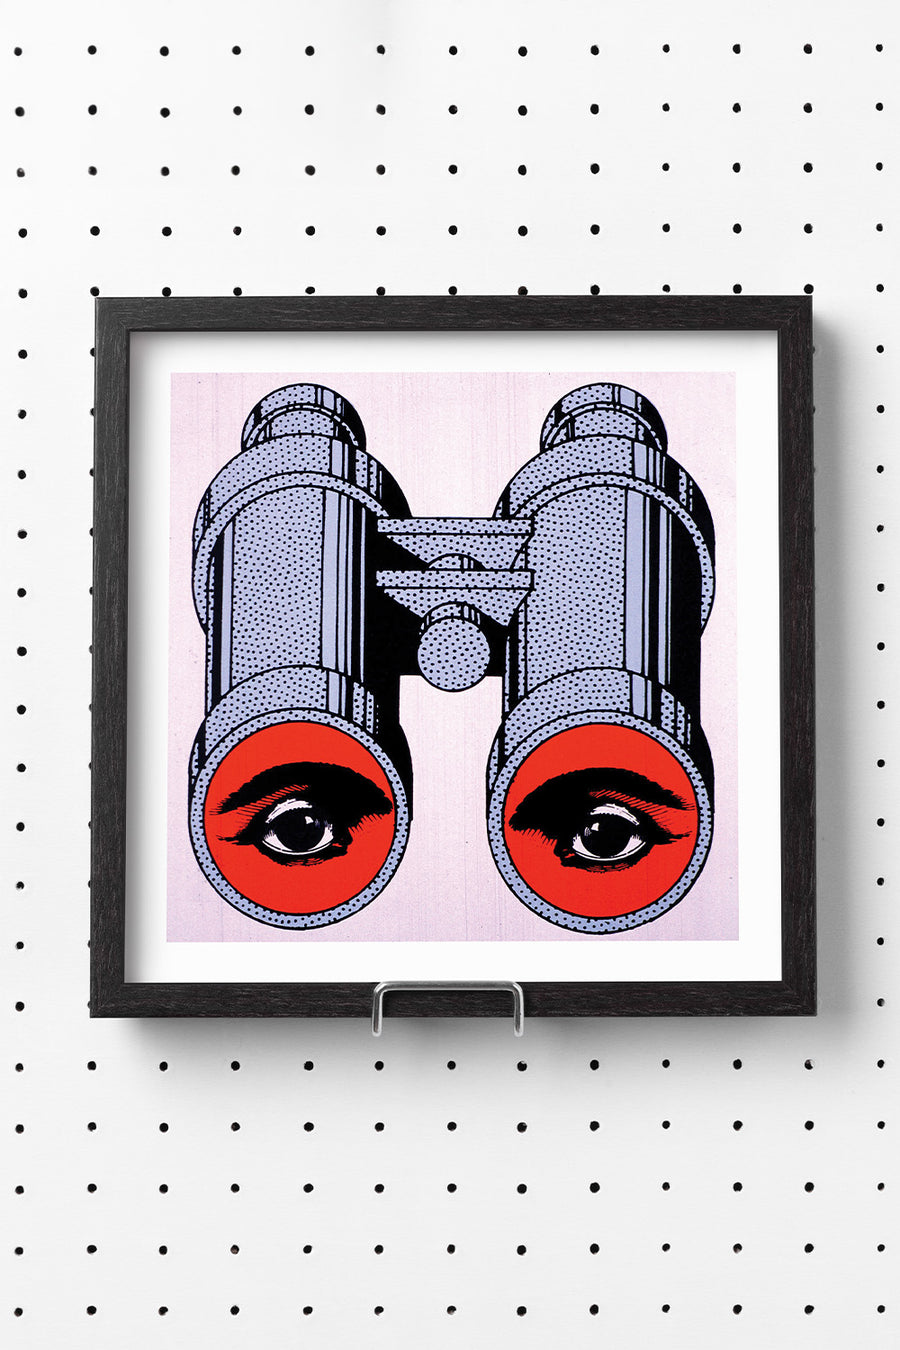 Square pop art of binoculars with illustrated eyes on a purple background.